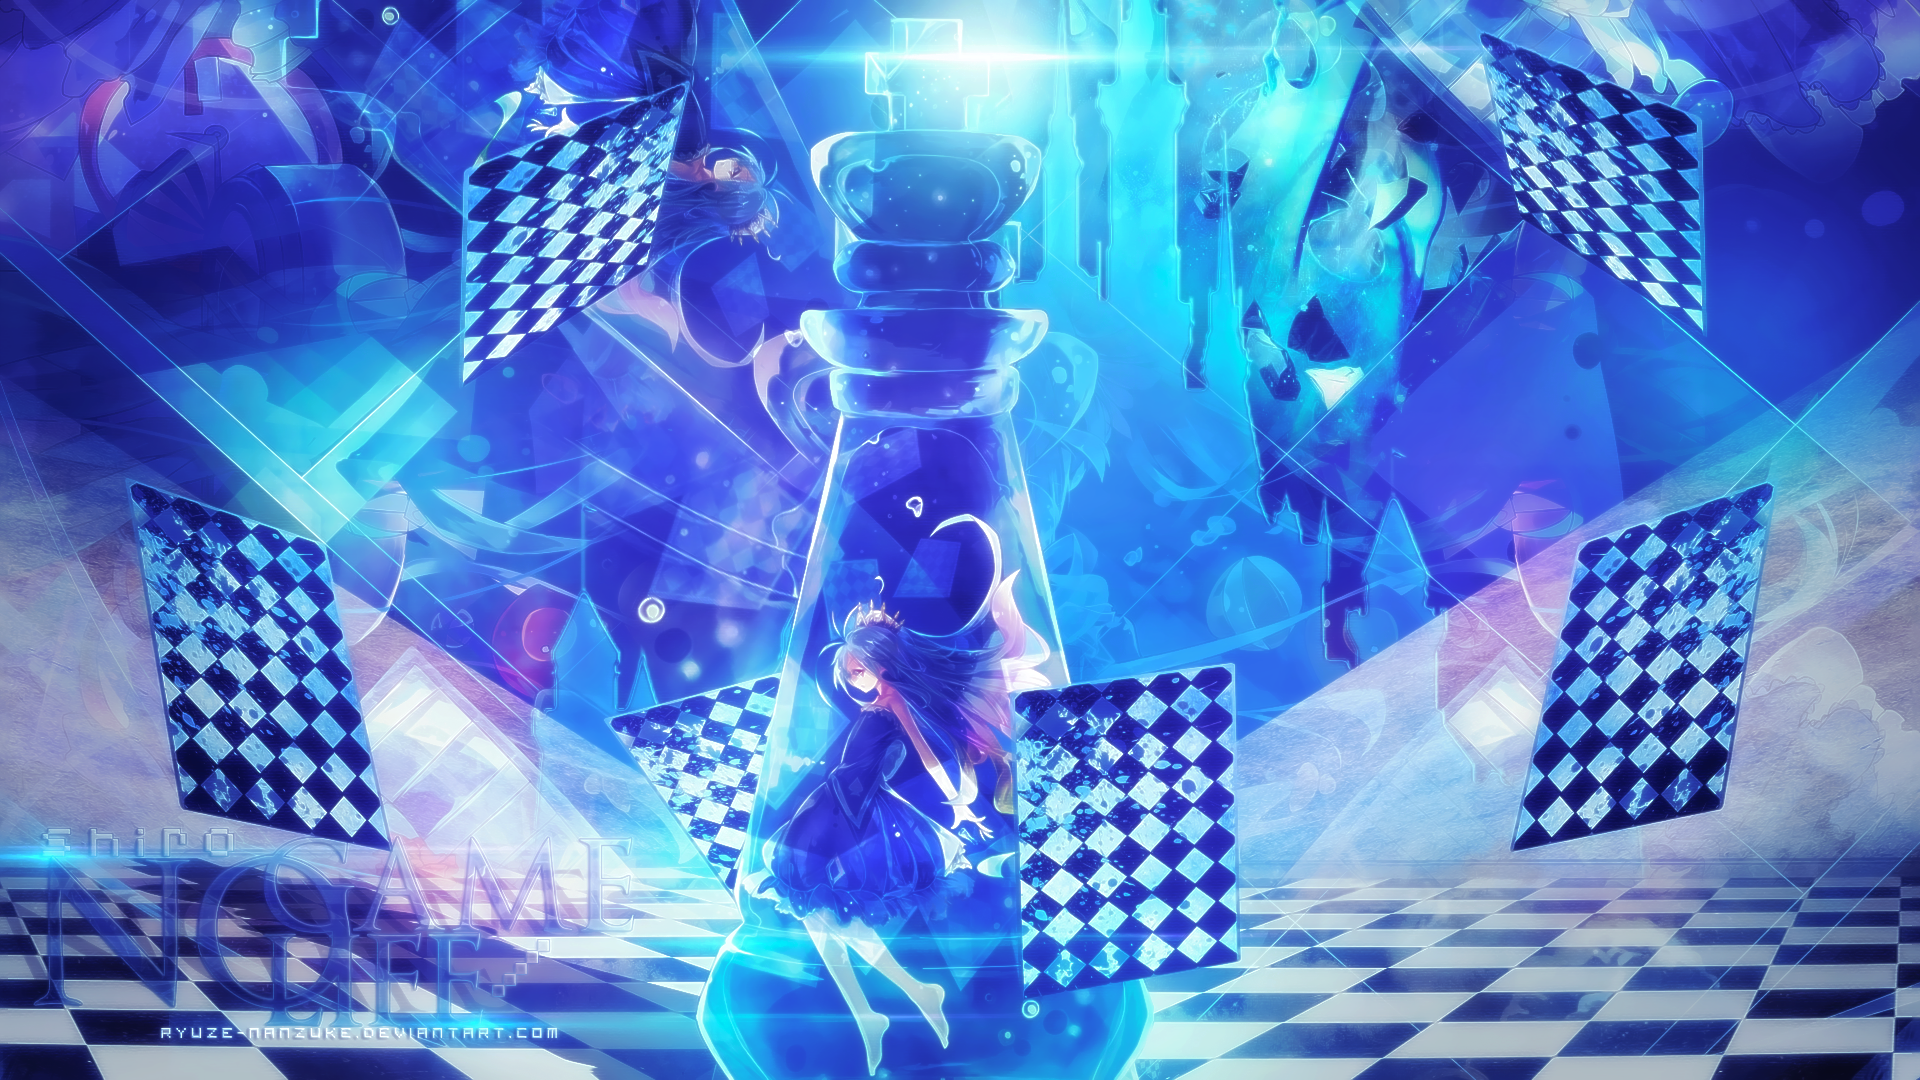 HD wallpaper featuring Shiro from No Game No Life. Shiro, barefoot and wearing a dress, stands by a large chess piece, surrounded by chessboards. She wears a crown, showcasing her character's regal theme.